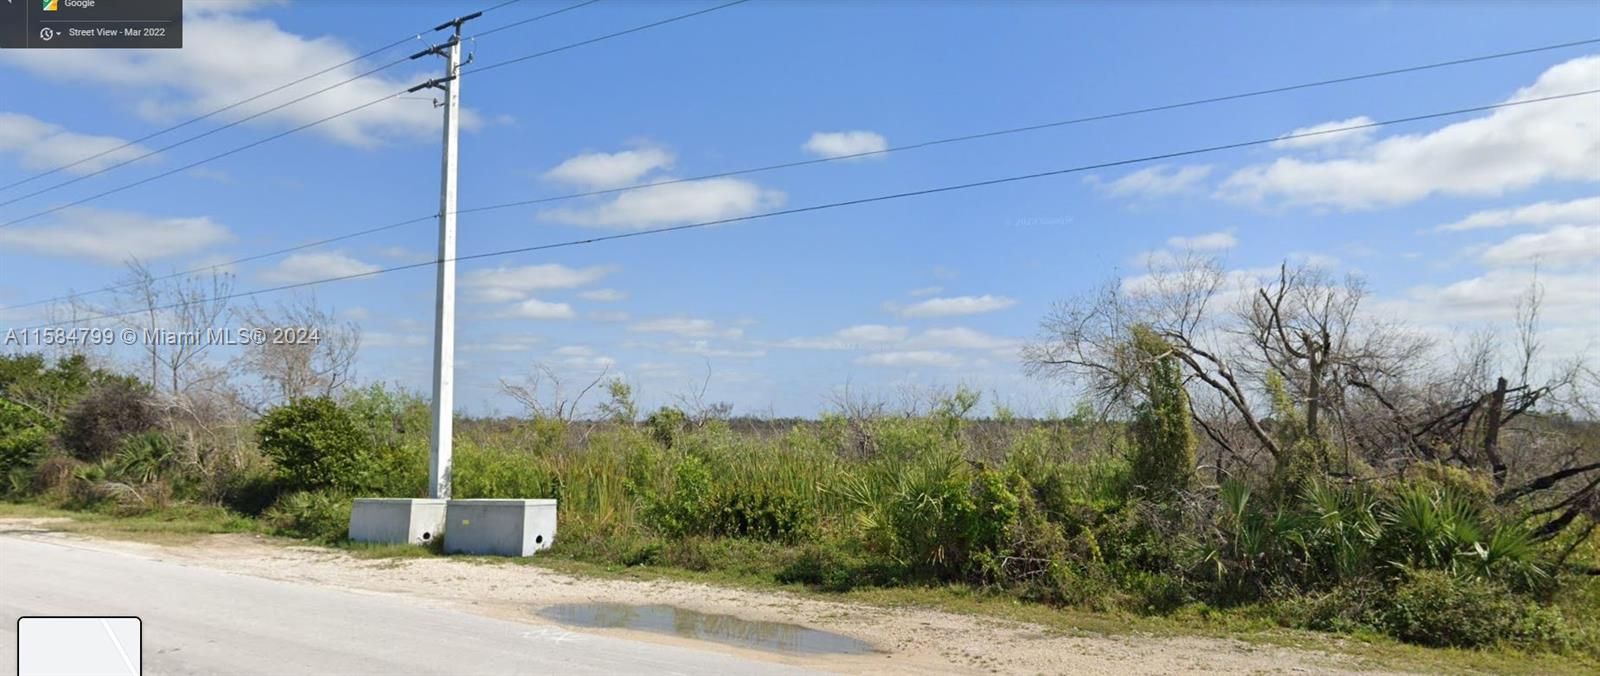 STREET VIEW OF SUBJECT PROPERTY LAND